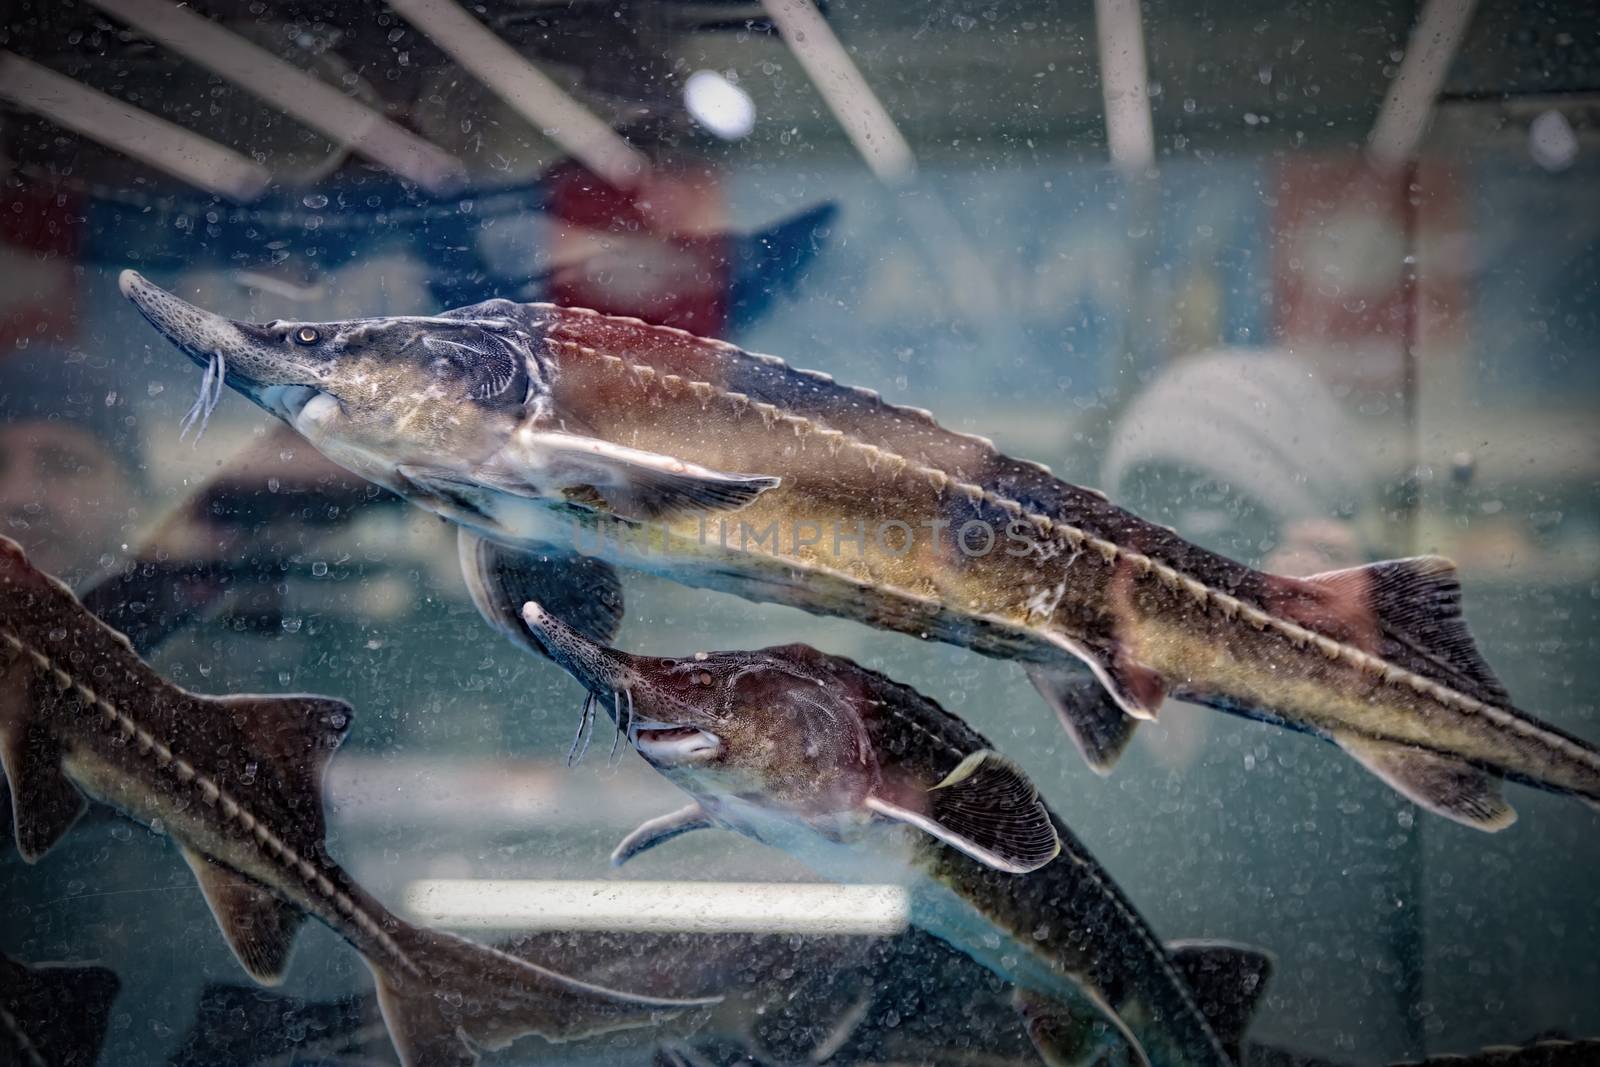 live sturgeon in an aquarium is sold in a grocery store. Food rich in phosphorus. Delicacy.